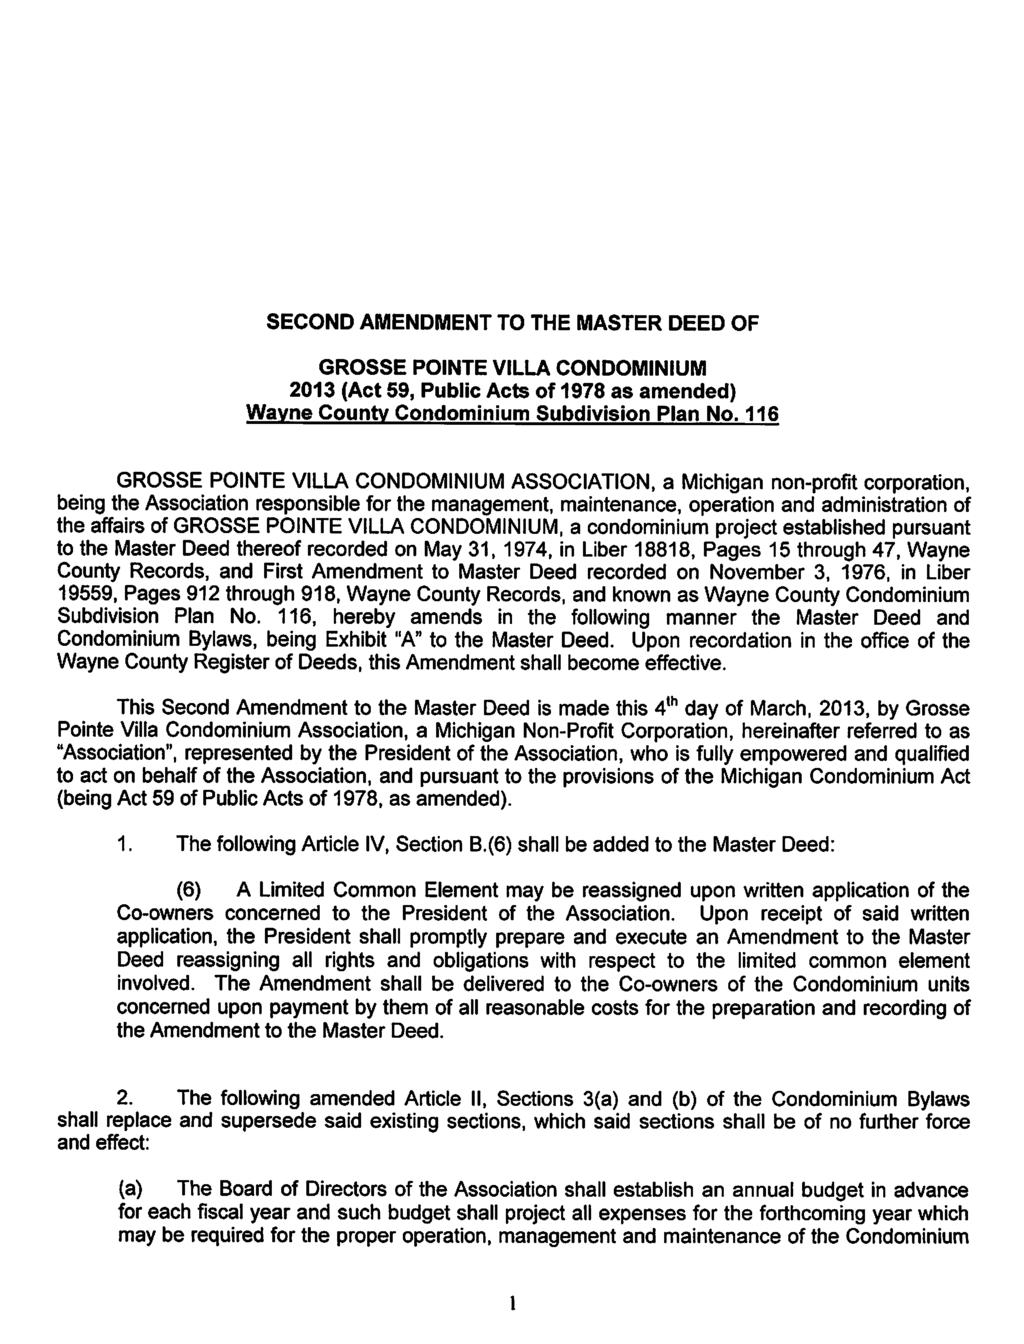 SECOND AMENDMENT TO THE MASTER DEED OF GROSSE POINTE VILLA CONDOMINIUM 2013 (Act 59, Public Acts of 1978 as amended) Wayne County Condominium Subdivision Plan No.